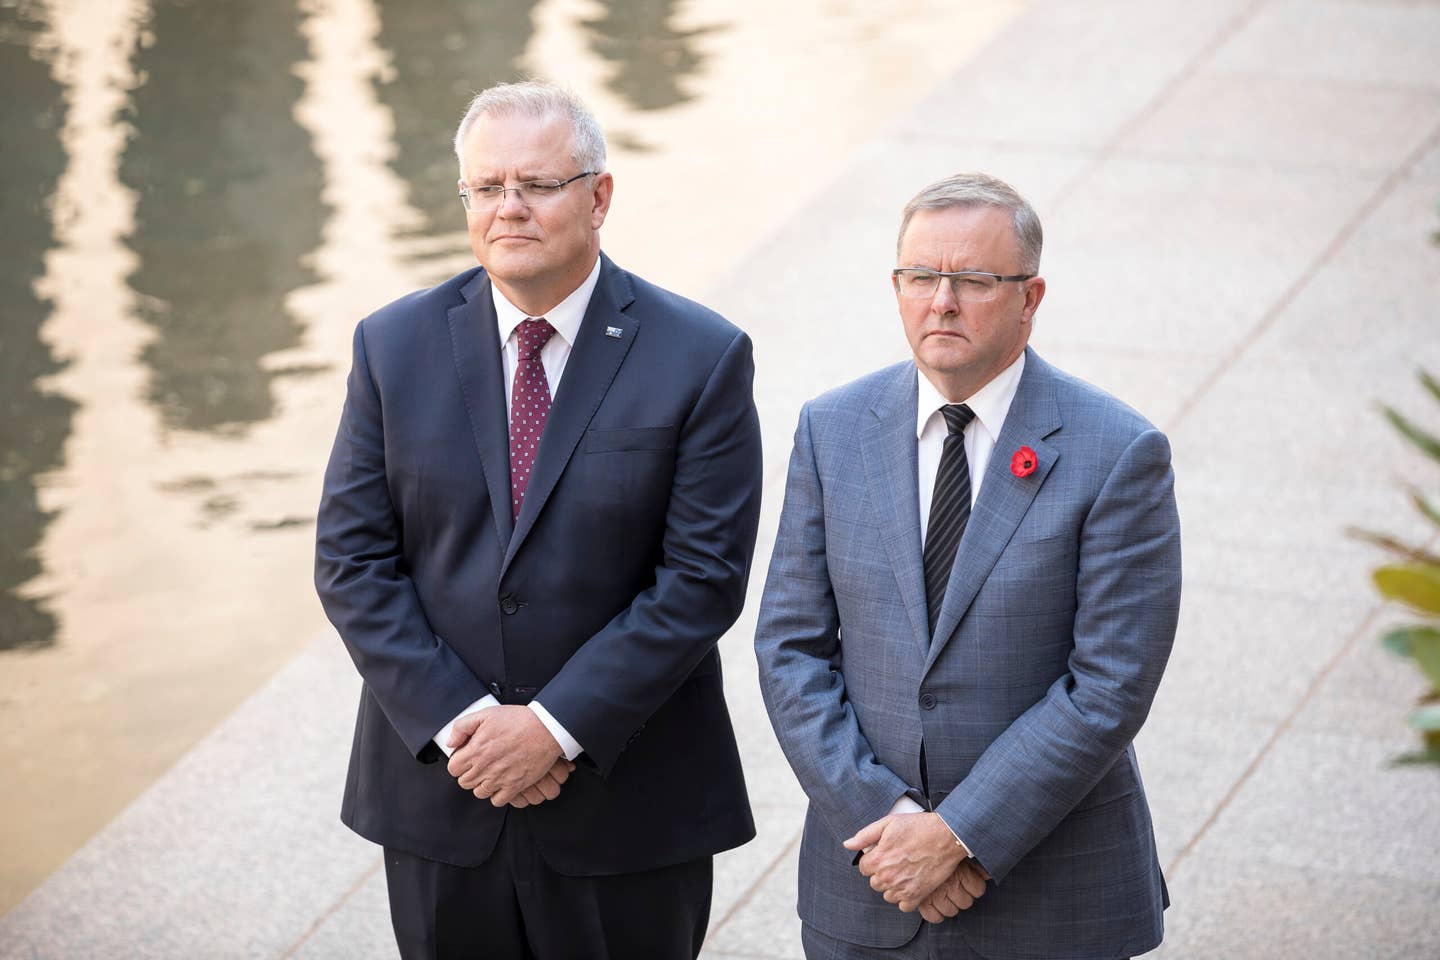 The then Prime Minister of Australia Scott Morrison (left) and Leader of the Opposition Anthony Albanese at the Australian War Memorial to mark the opening of the 2020 Parliament in Canberra. Albanese became the 31st prime minister of Australia on May 31. <em>Australian Department of Defense</em>